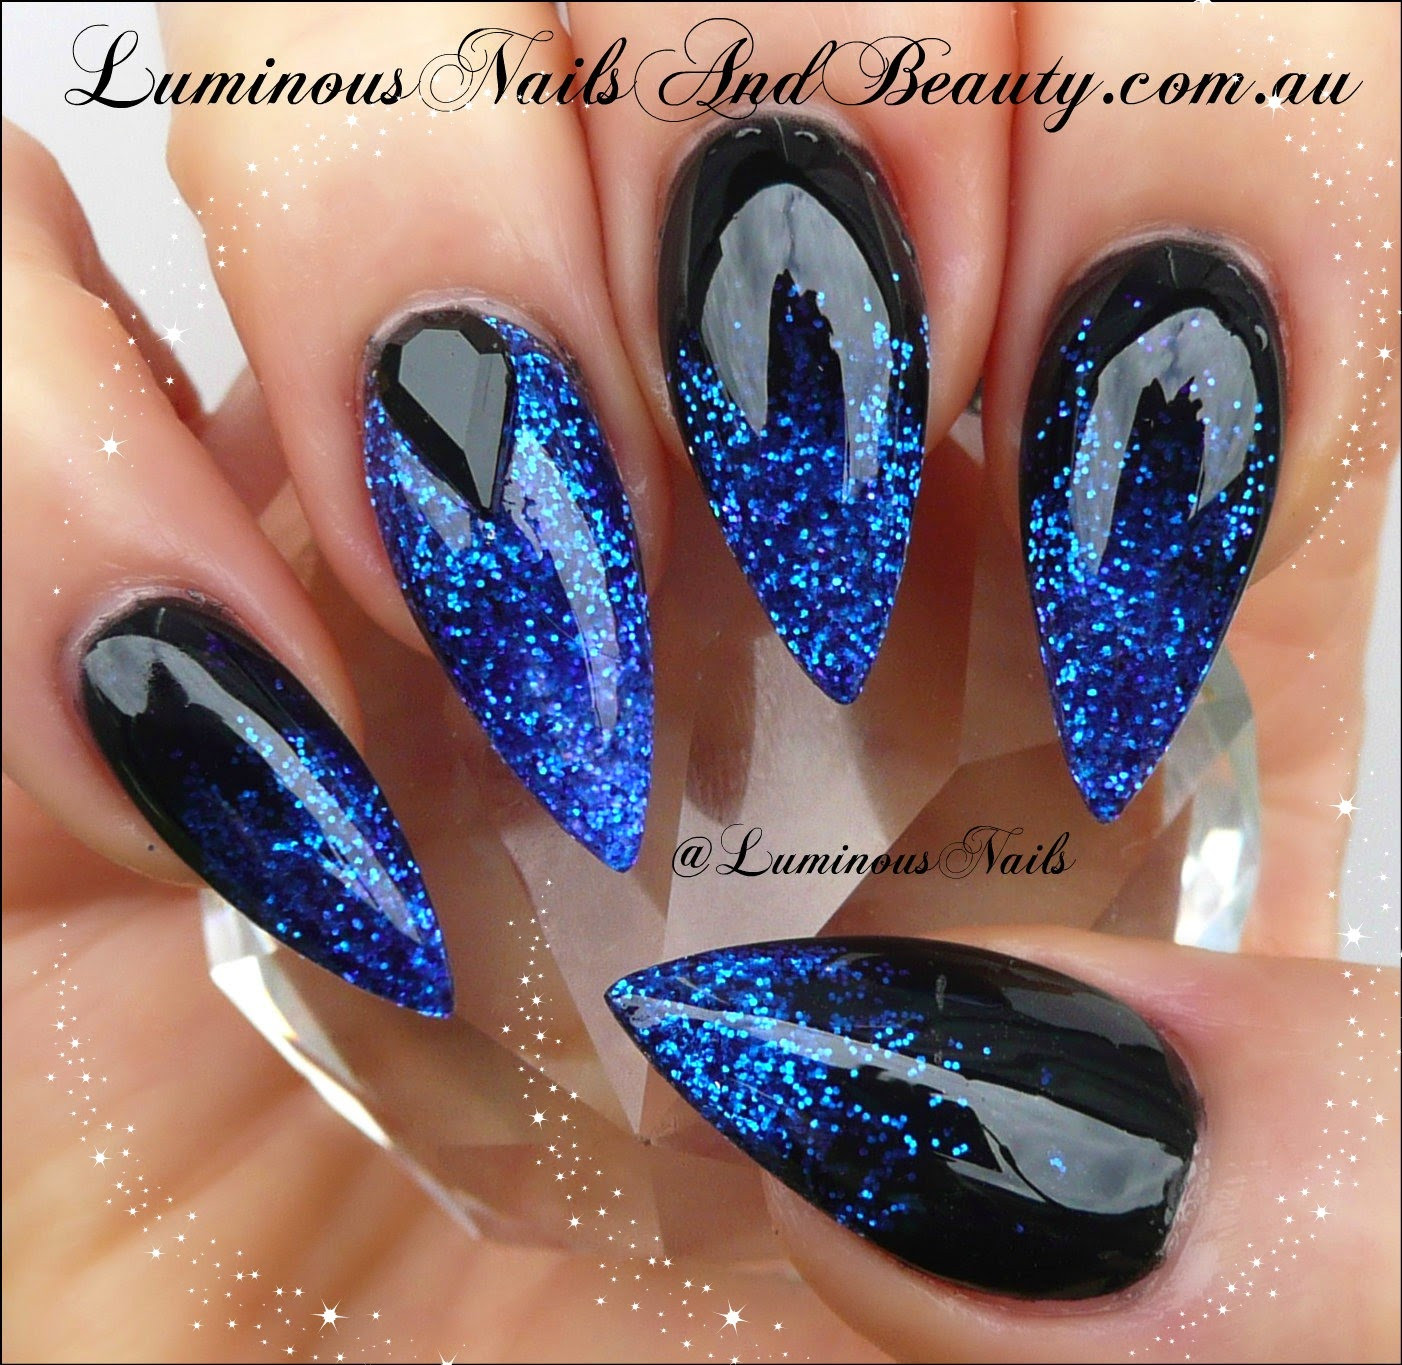 Blue And Black Nail Designs
 Lime Green And Black Nails